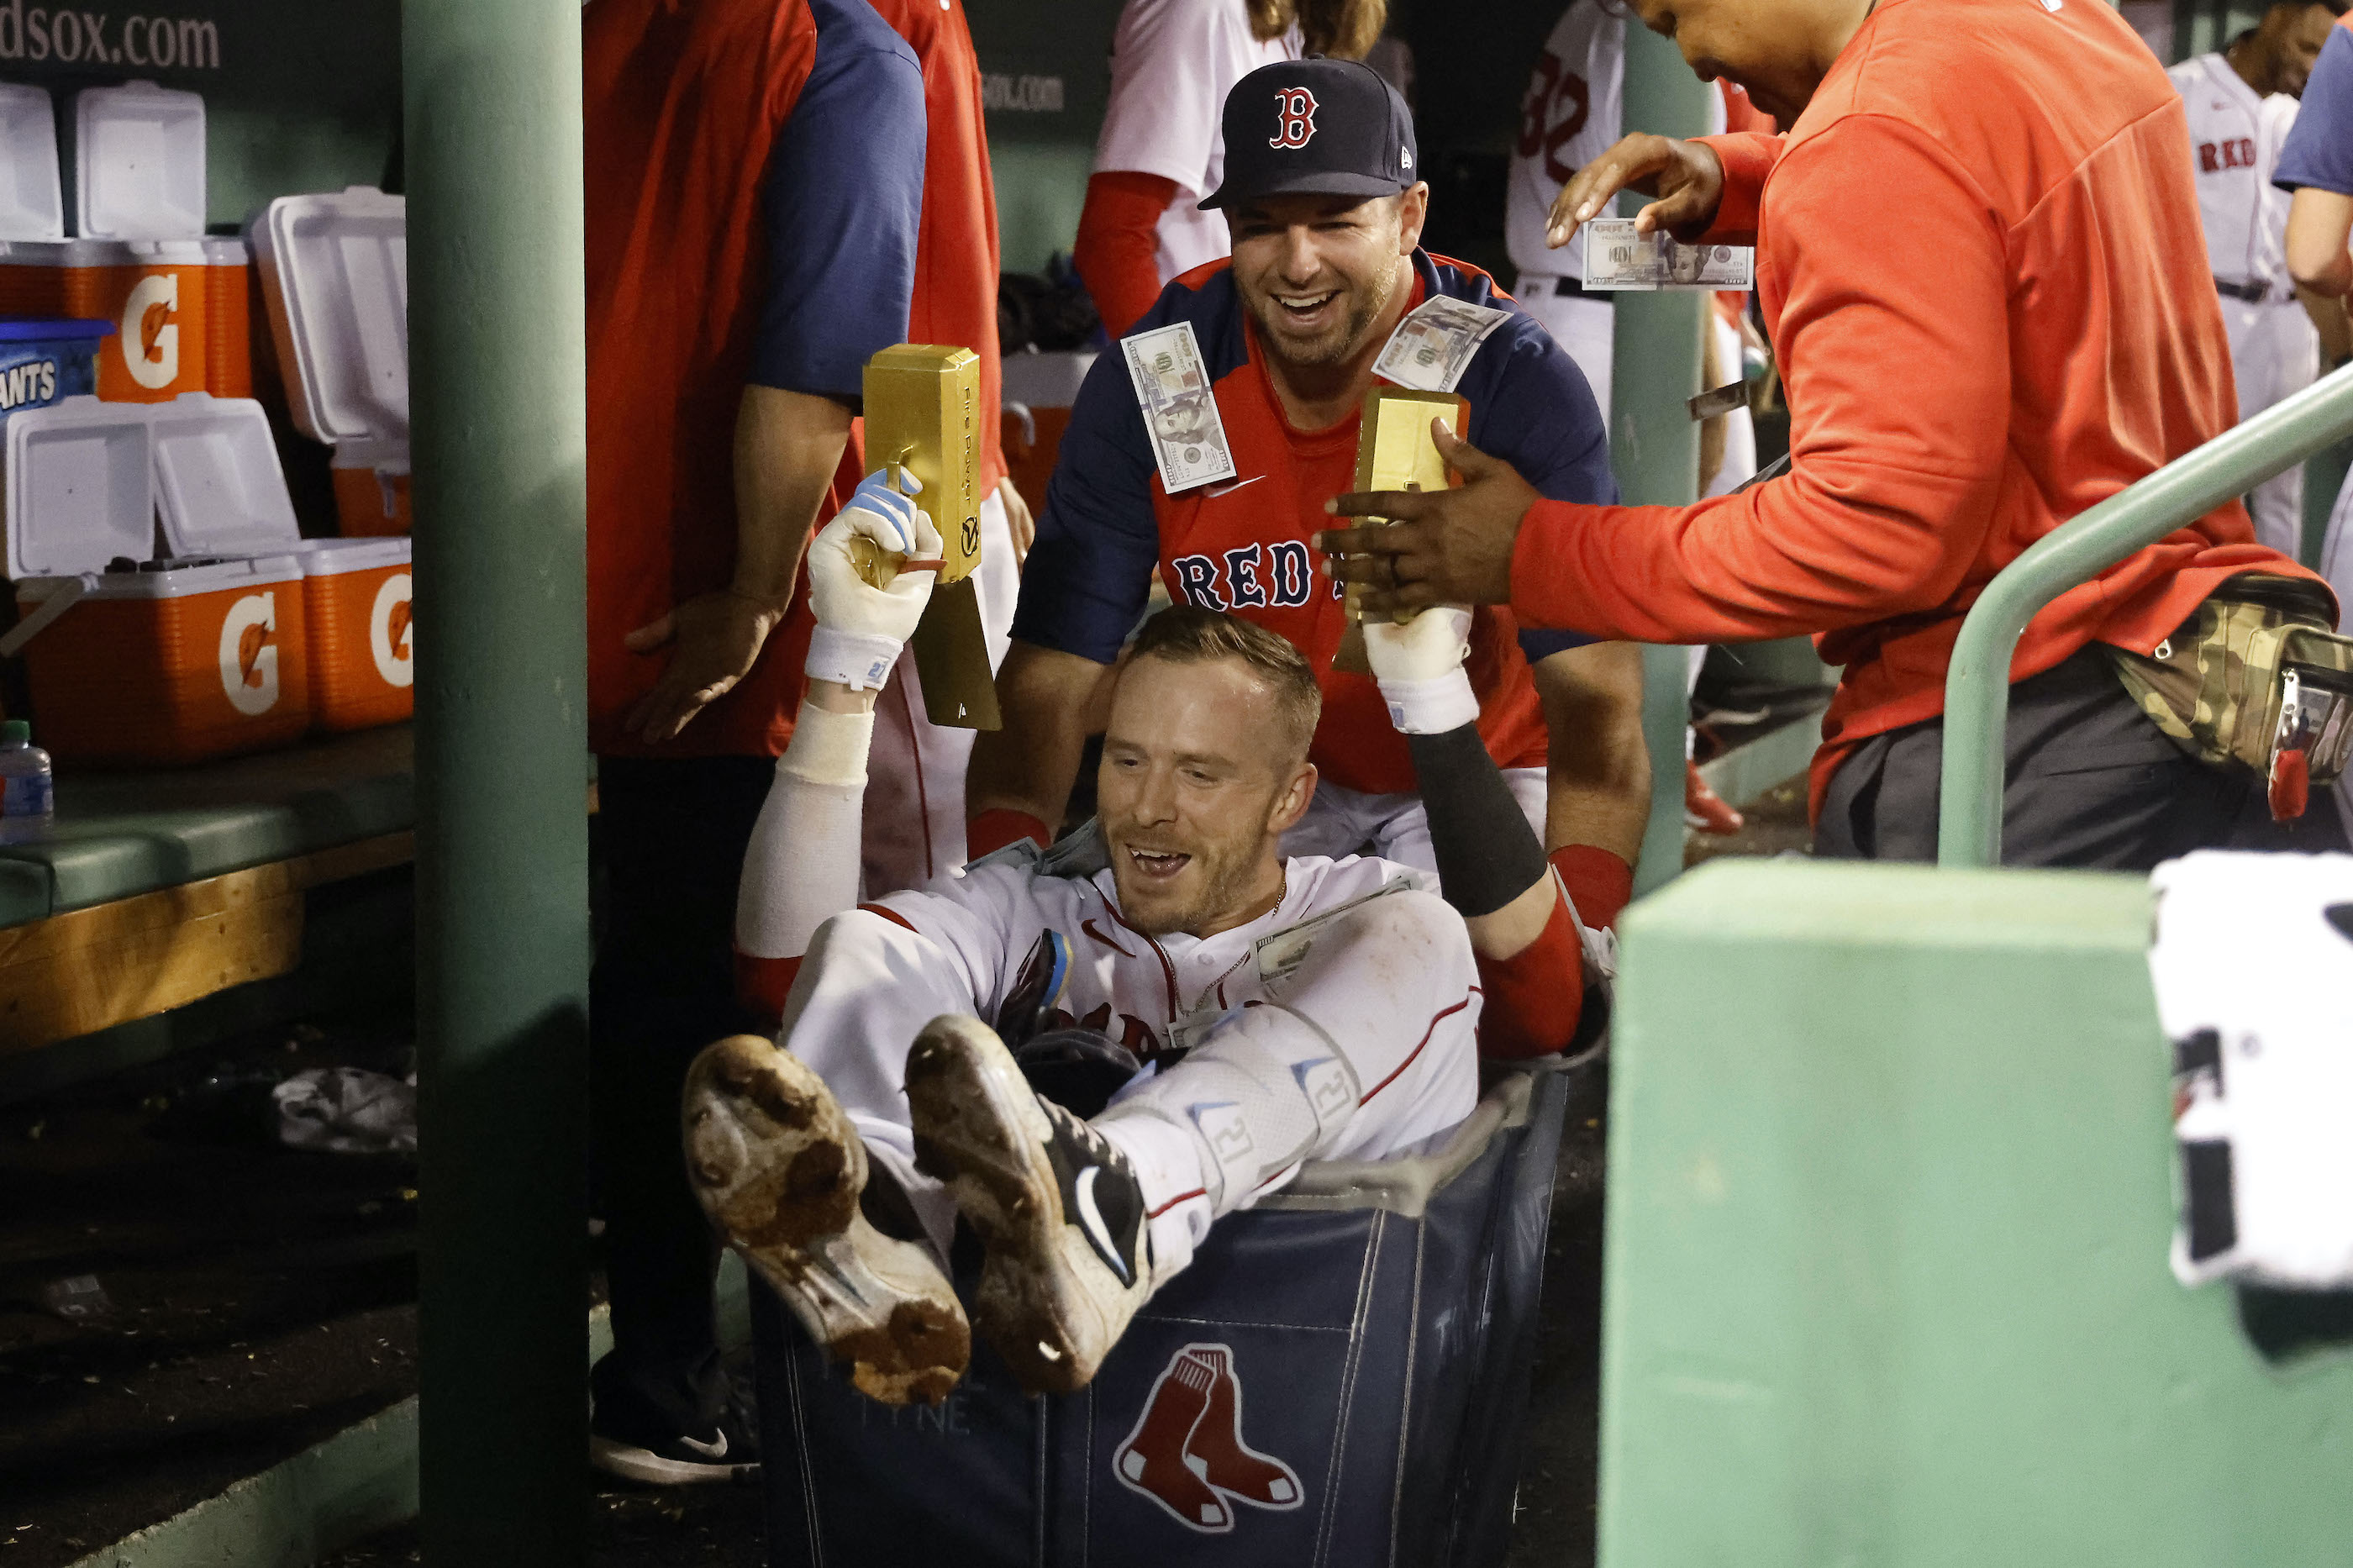 Trevor Story #10 of the Boston Red Sox holds toy money guns as he gets a ride in a laundry cart after his home run against the Houston Astros in the seventh inning at Fenway Park on May 16, 2022 in Boston, Massachusetts.